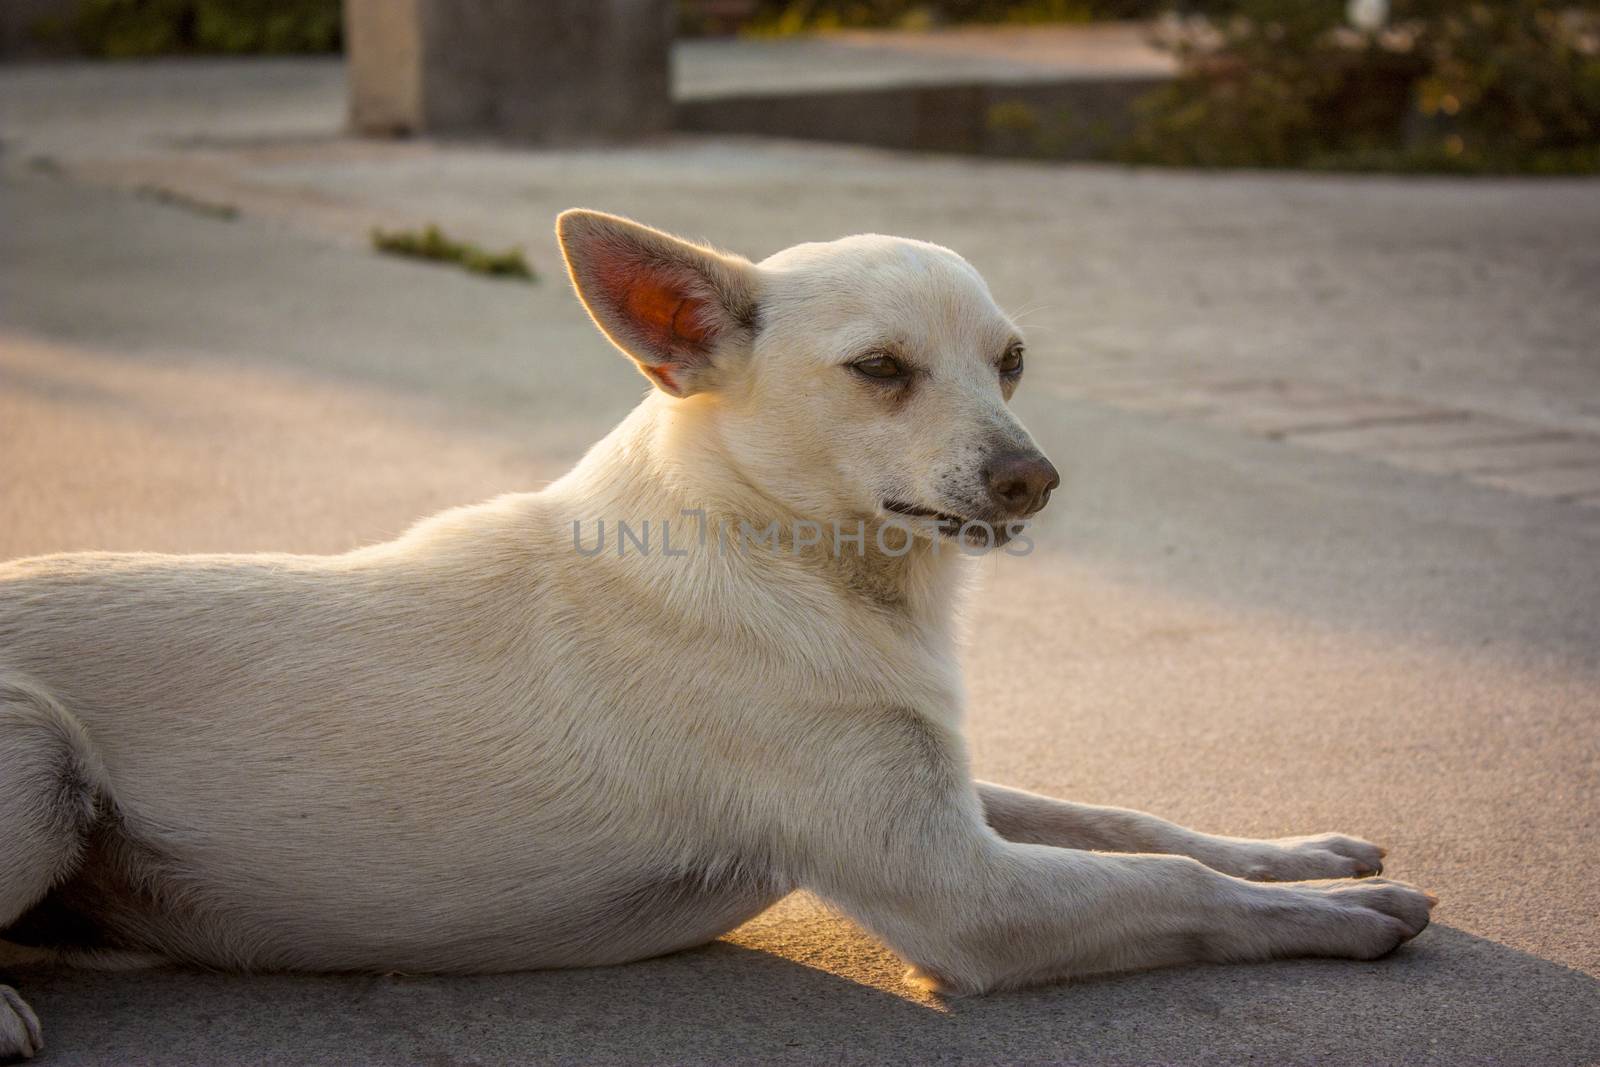 Half-breed dog in a moment of rest by pippocarlot